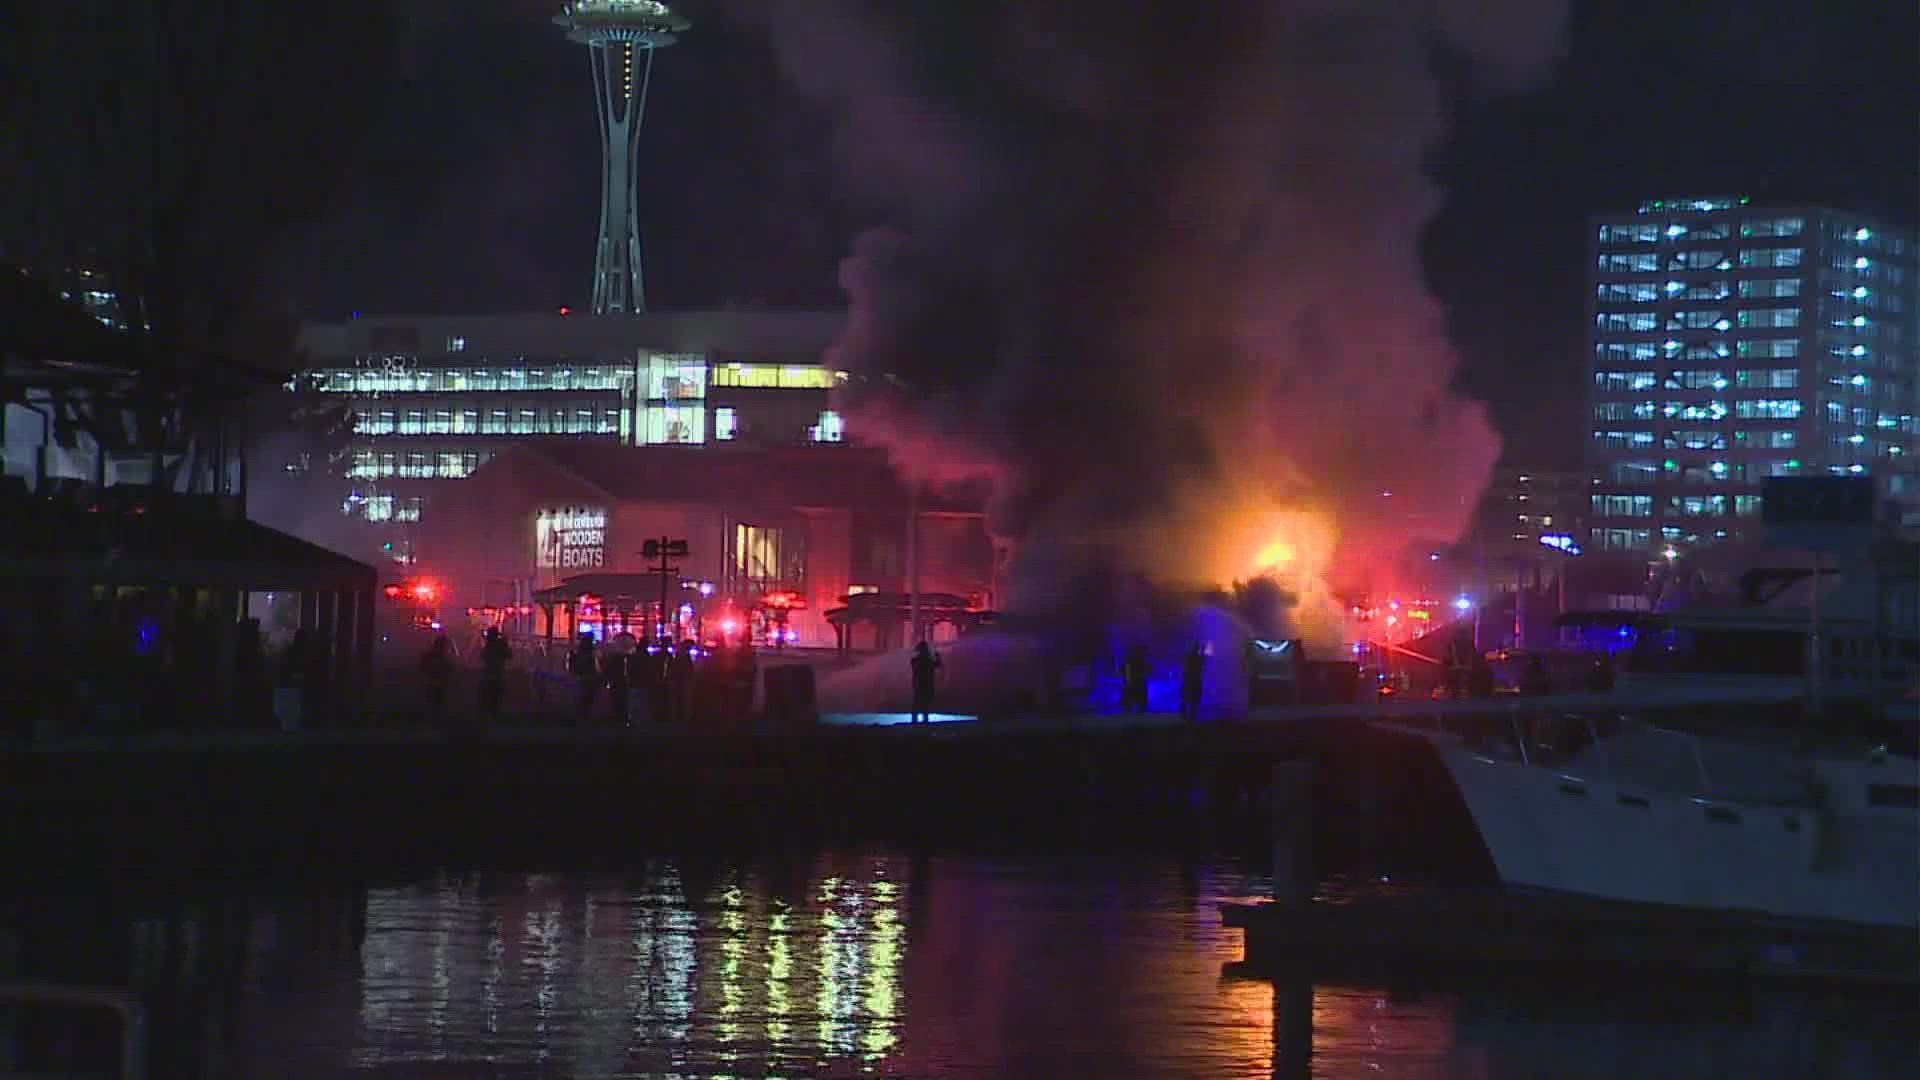 Seattle firefighters are investigating what sparked a large boat fire on Lake Union early Saturday morning.